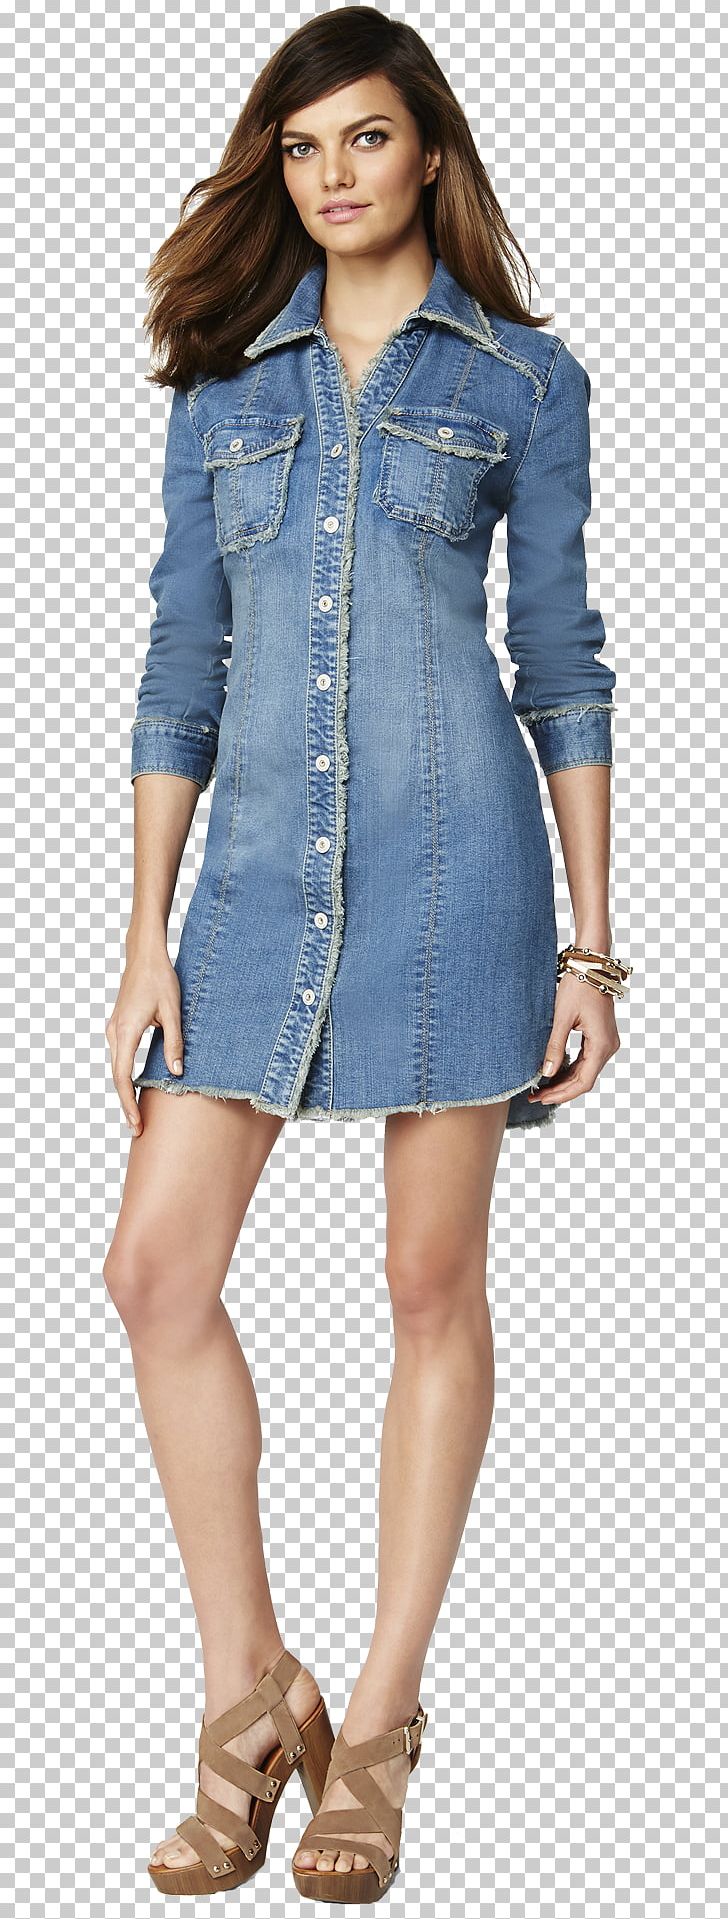 Denim Jeans Dress Casual Fashion PNG, Clipart, Casual, Clothing, Clothing Accessories, Day Dress, Denim Free PNG Download